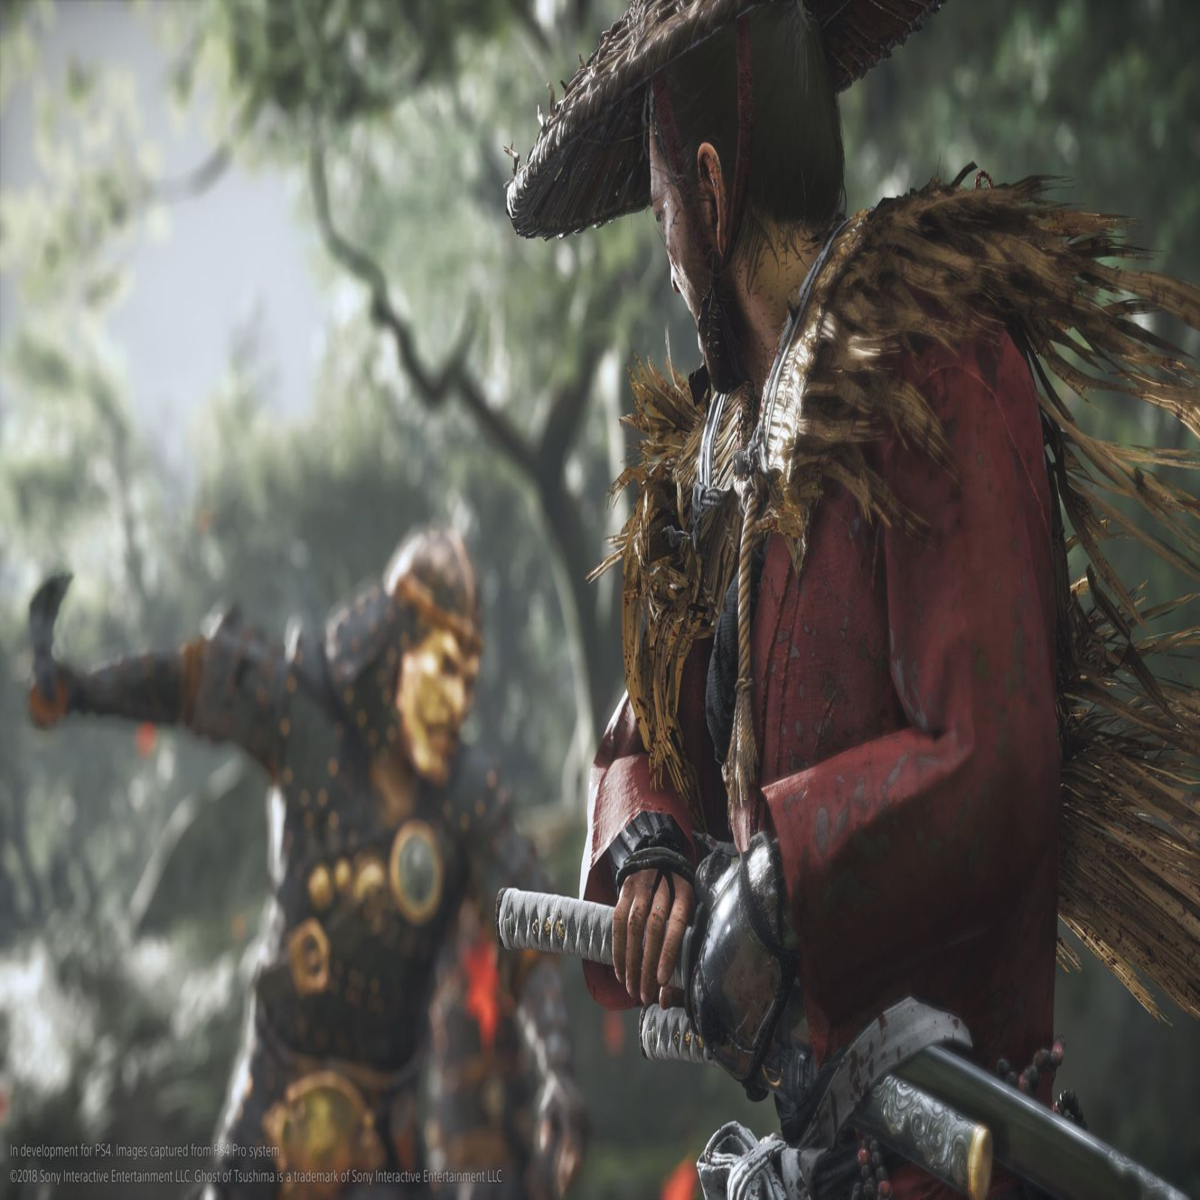 Ghost of Tsushima's new box removes 'only on PlayStation